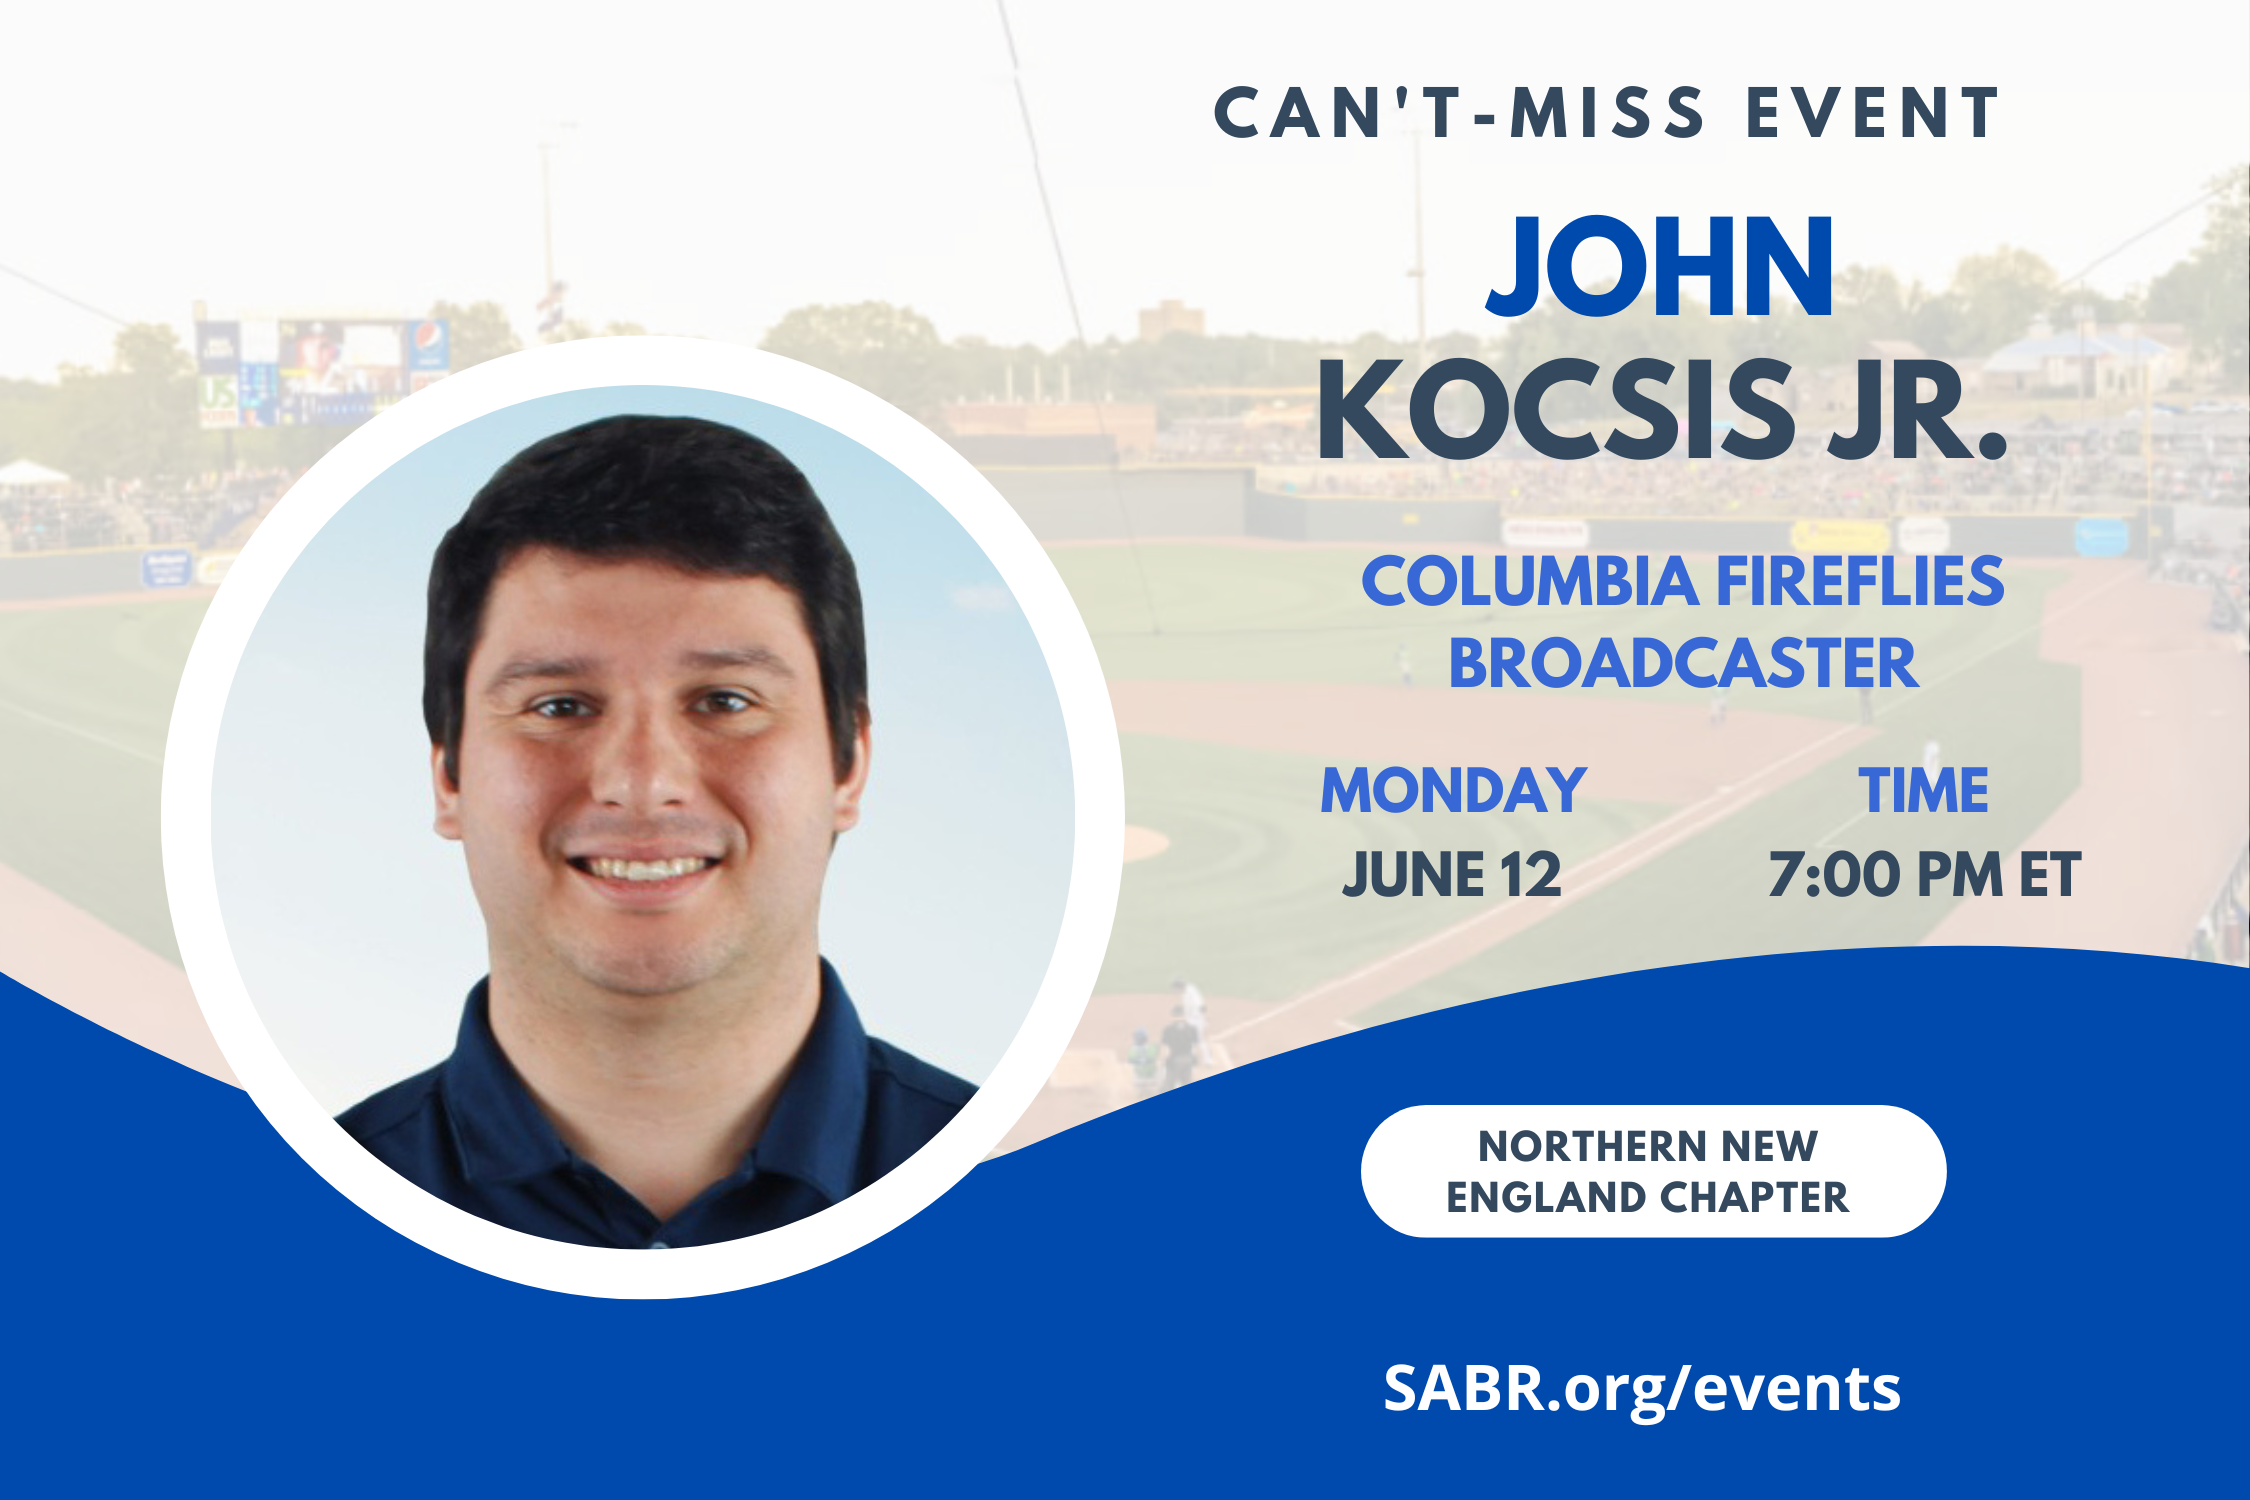 SABR's Northern New England Chapter will hold a virtual Zoom meeting at 7:00 p.m. on Monday, June 12. All baseball fans are welcome to attend. Our guest is John Kocsis Jr., broadcaster for the  Columbia Fireflies and author of a new book, "Play-by-Play from the Minors: Profiles of Baseball Broadcasters from Scranton to Yakima."